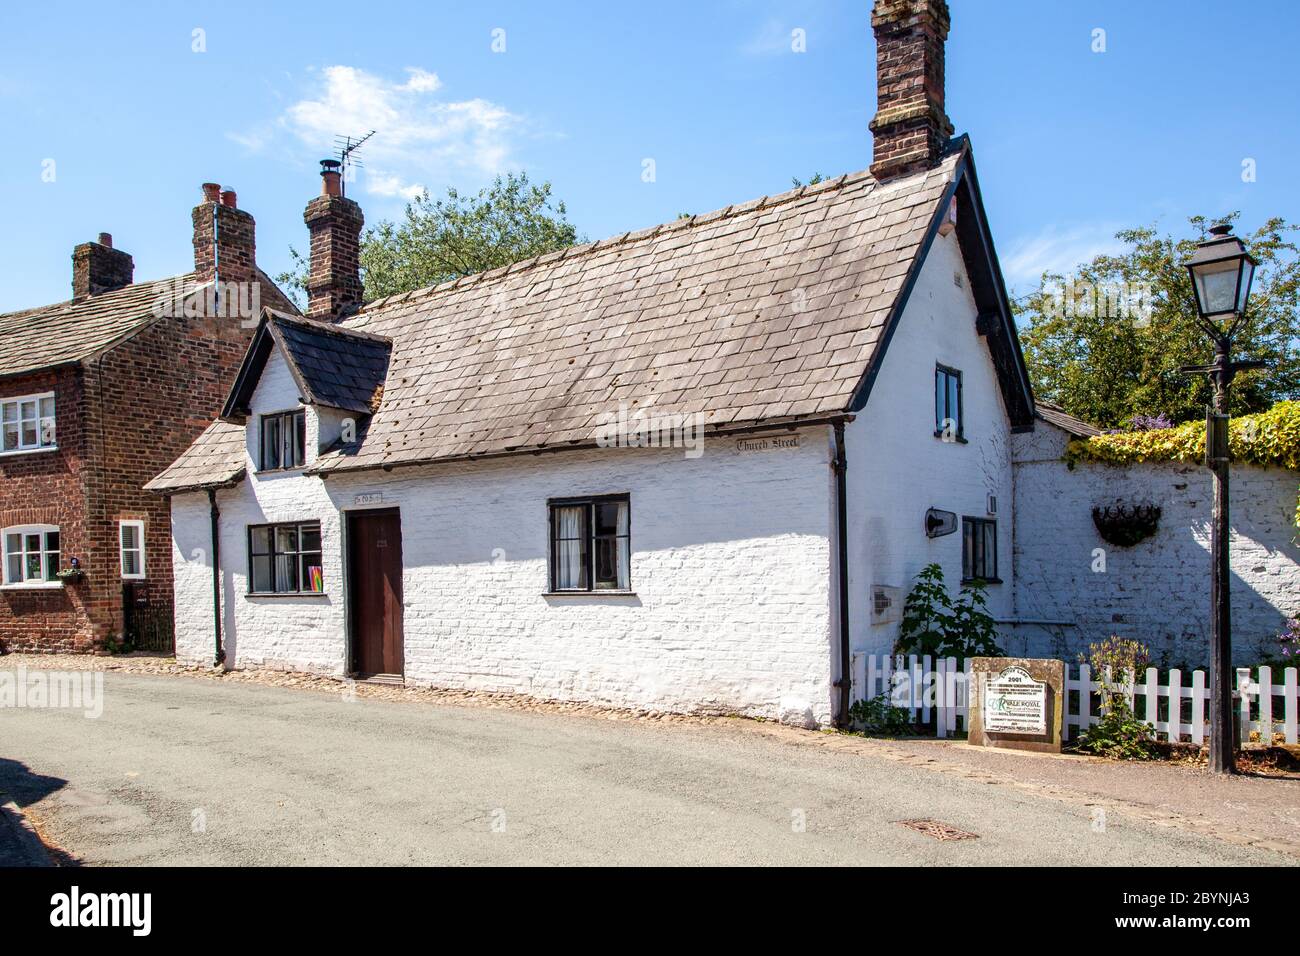 The Old Smithy the Blacksmiths house in the Cheshire rural country  village of Great Budworth England UK Stock Photo